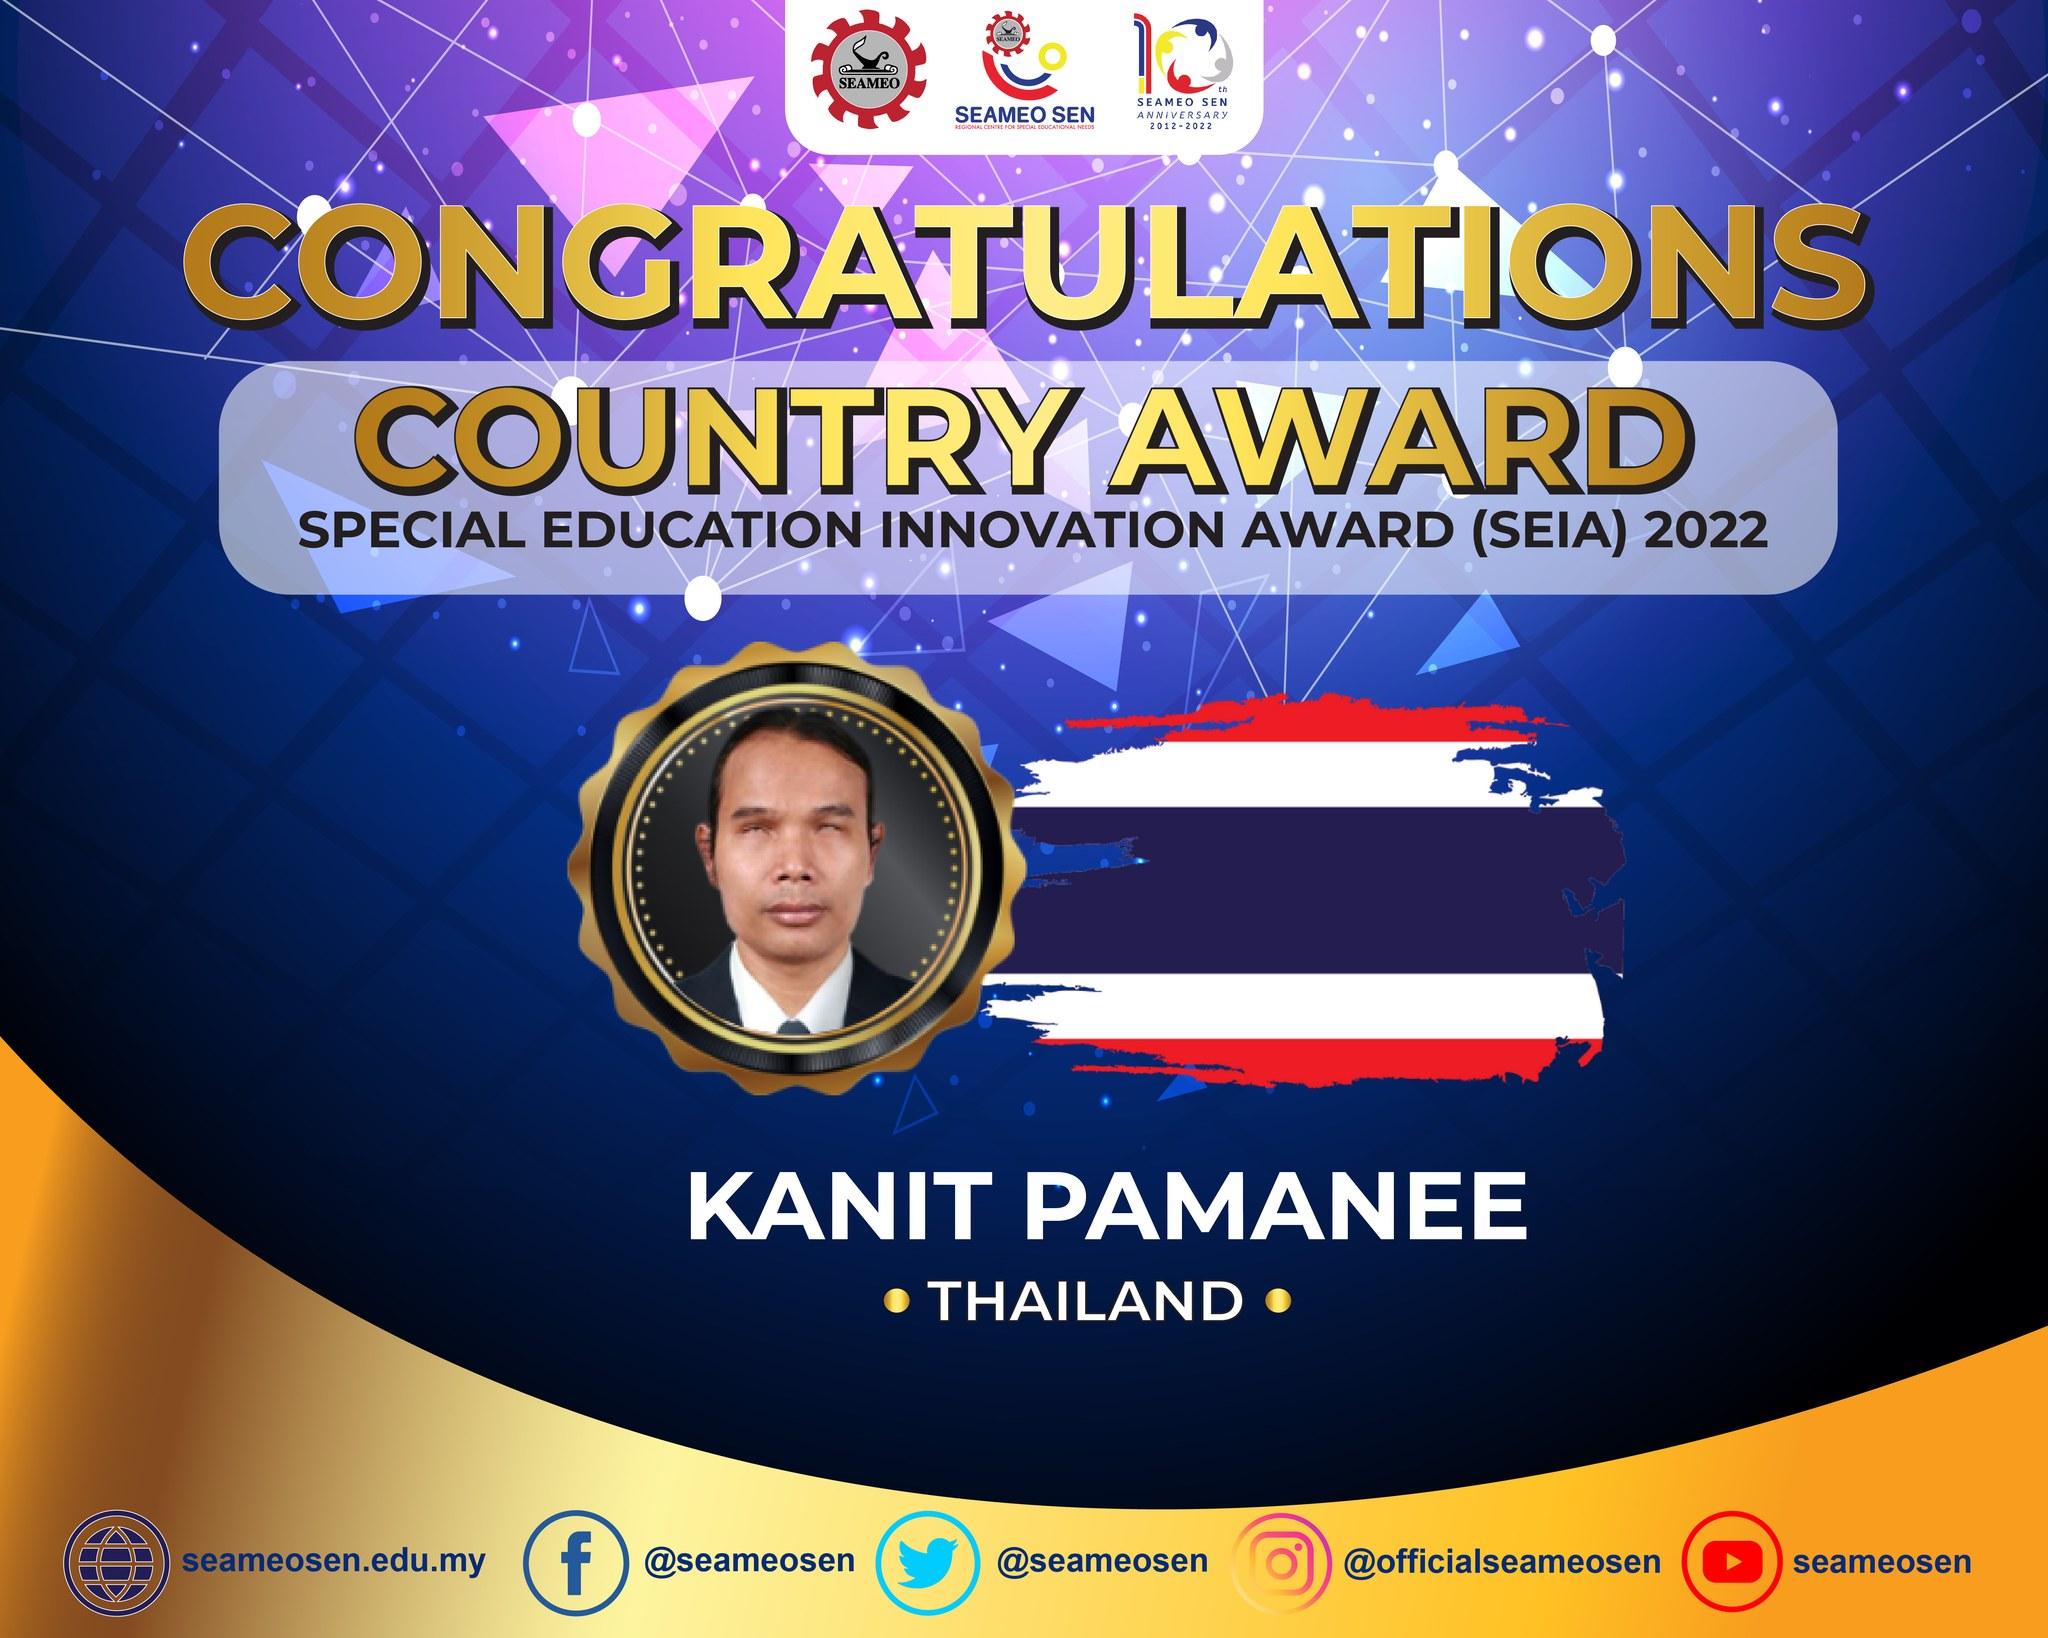 Country Award for Thailand is Mr. Kanit Pamanee